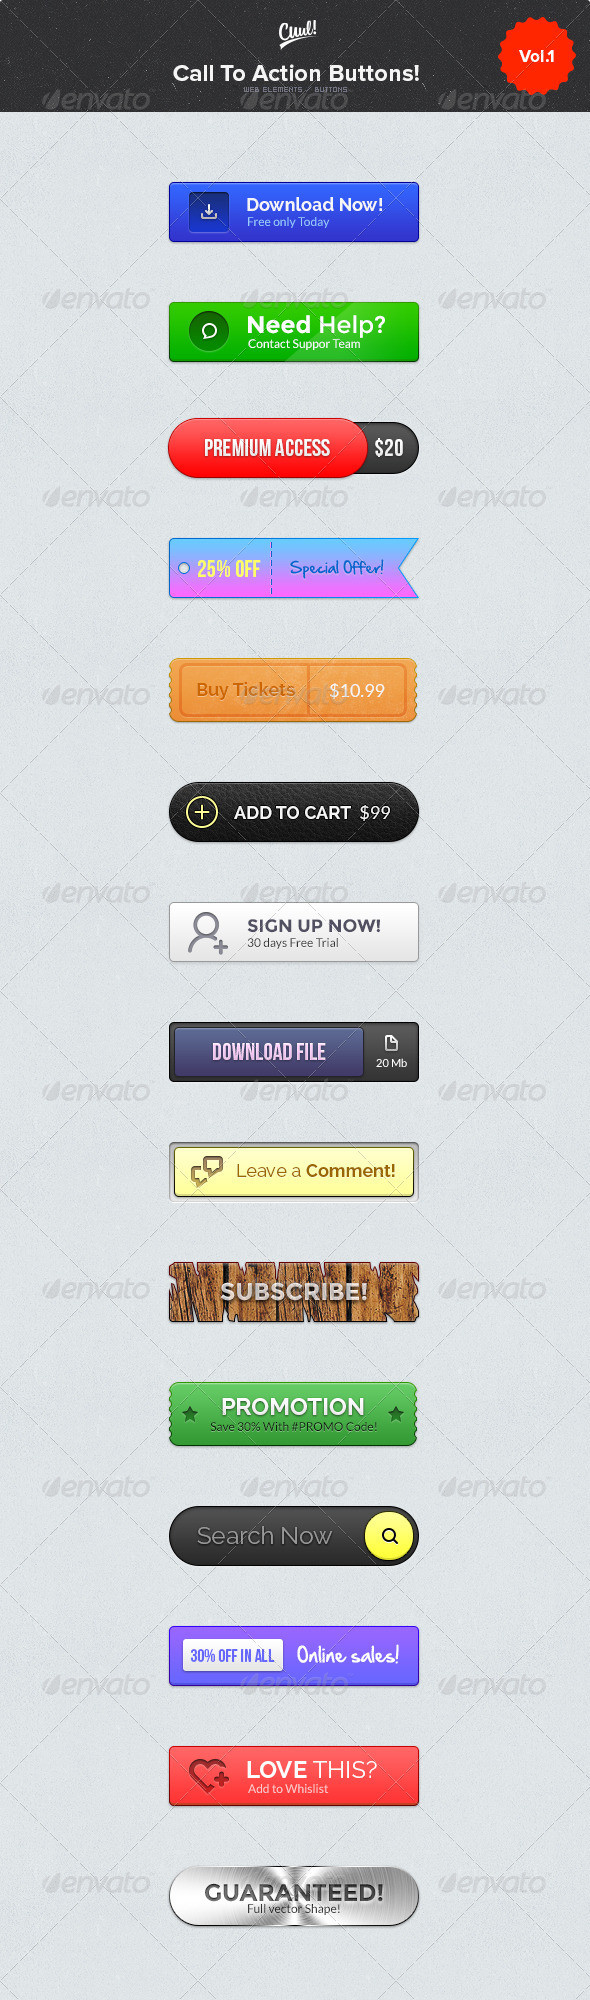 Graphicriver psd call to action buttons